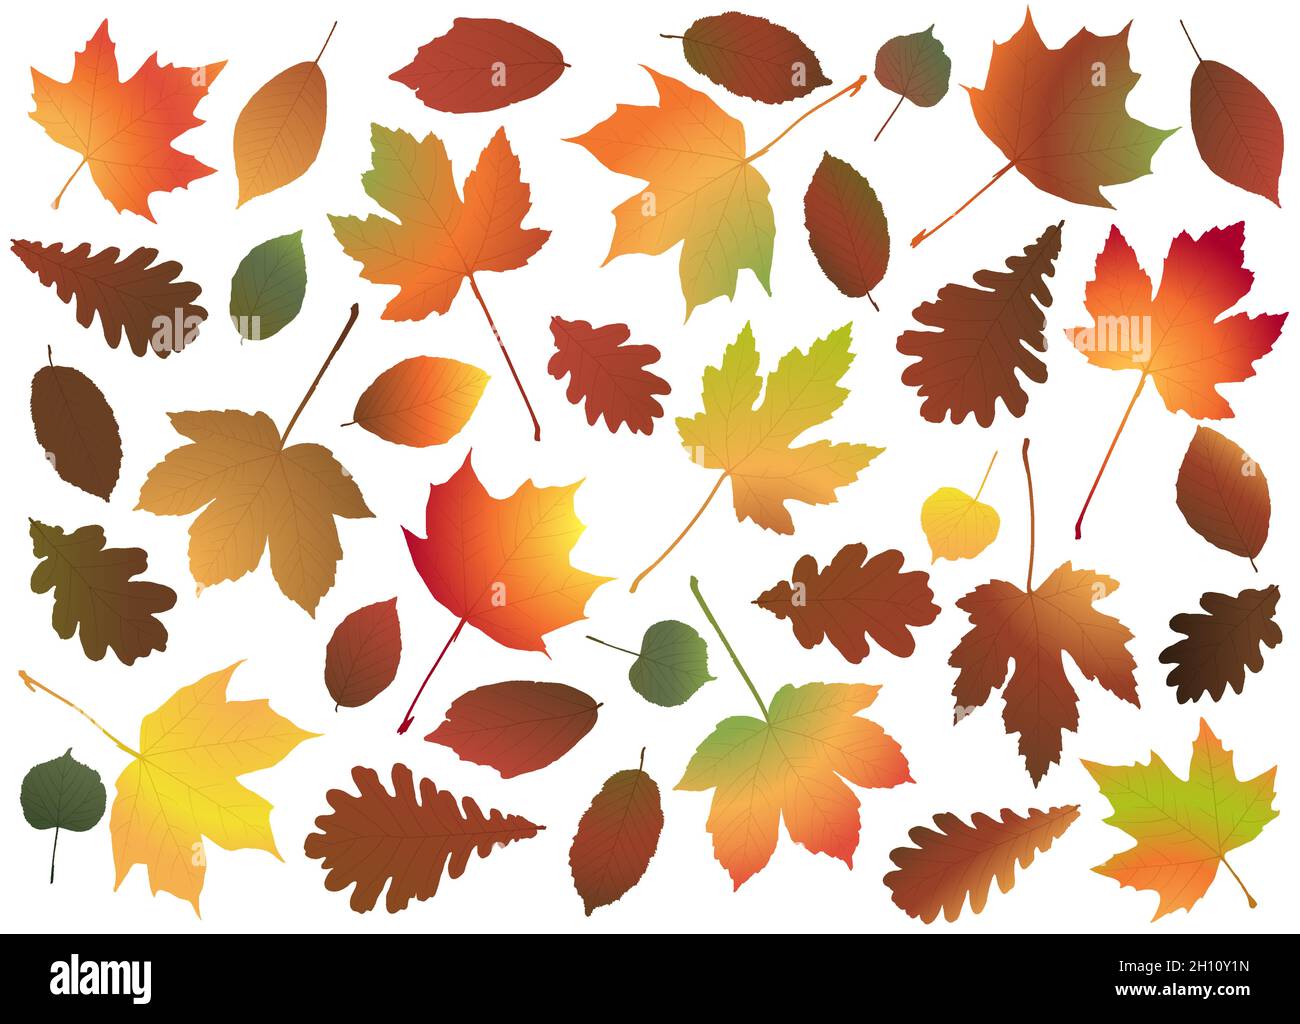 eps vector file with end of summer or fall maple, oak and other colored leaves collection, template for end of year advertising projects Stock Vector